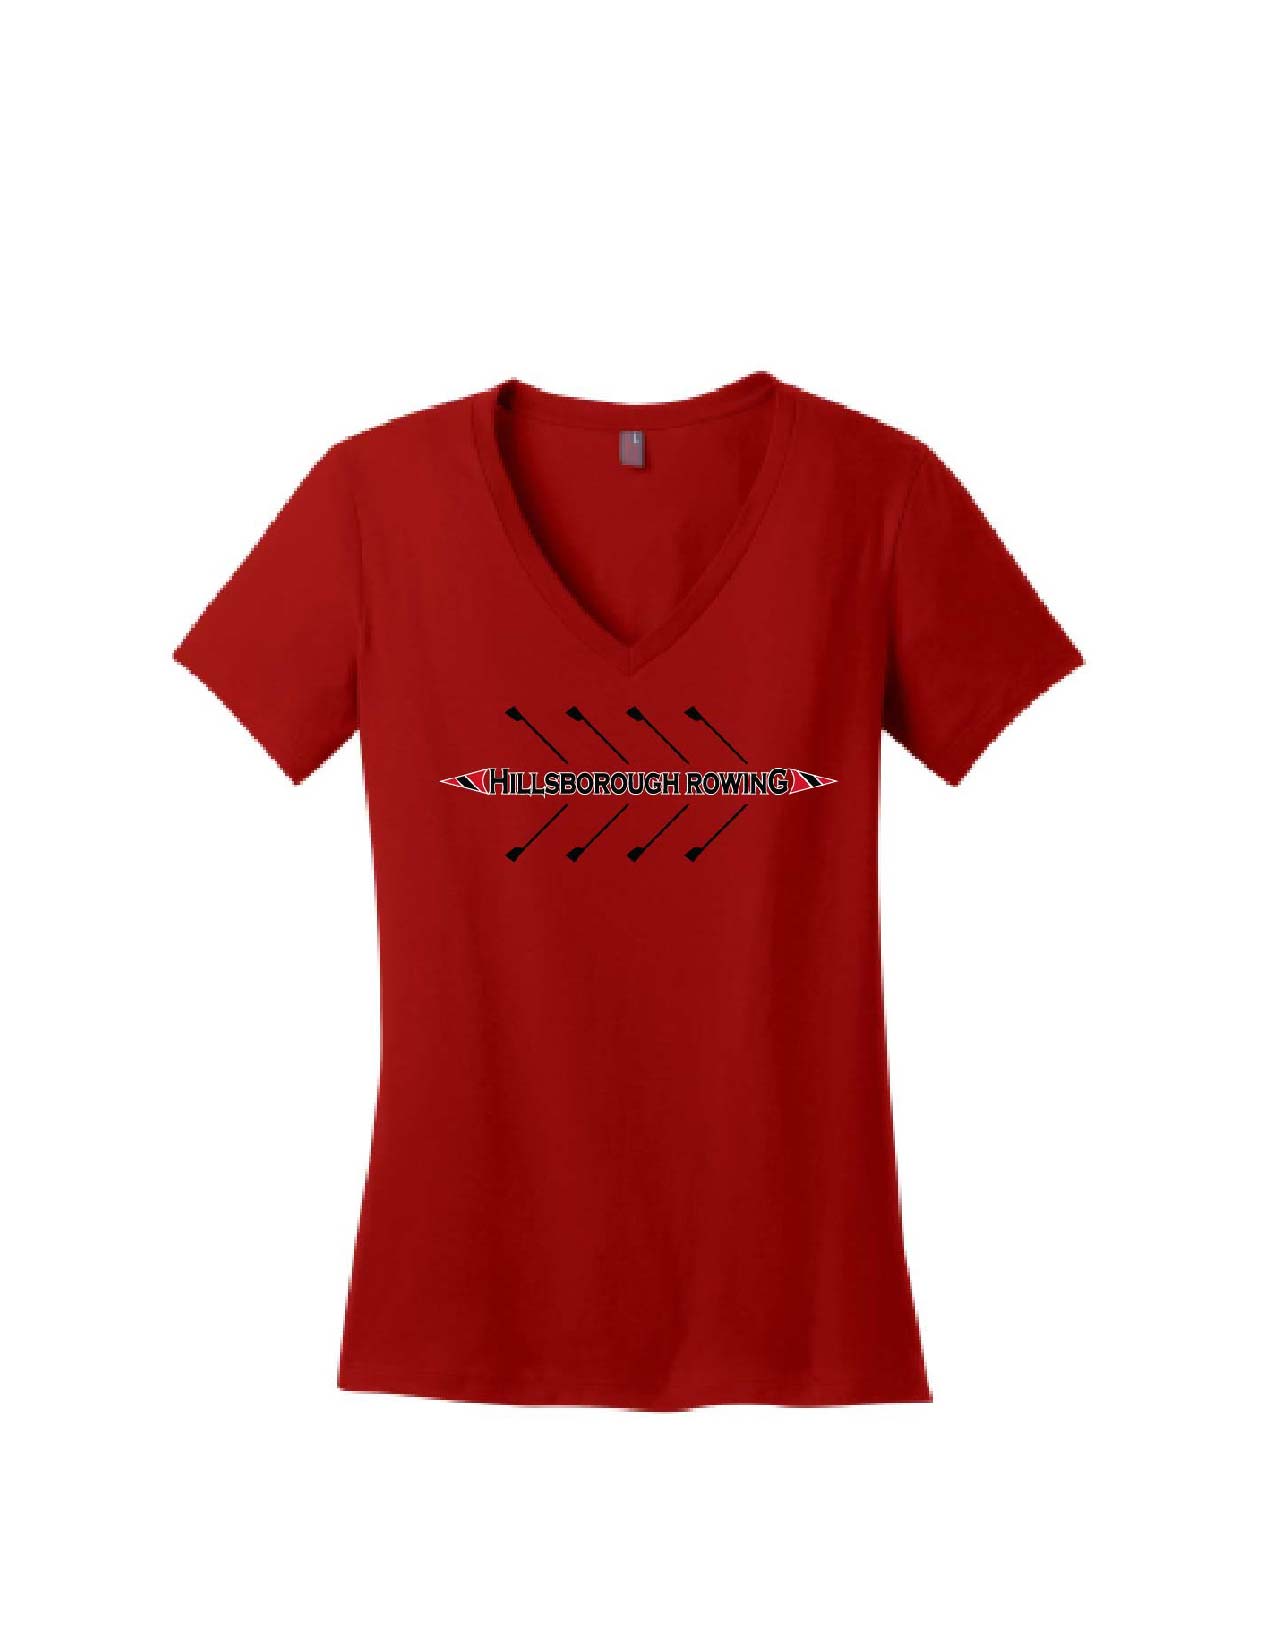 B - HHS Rowing T-Shirt - RED